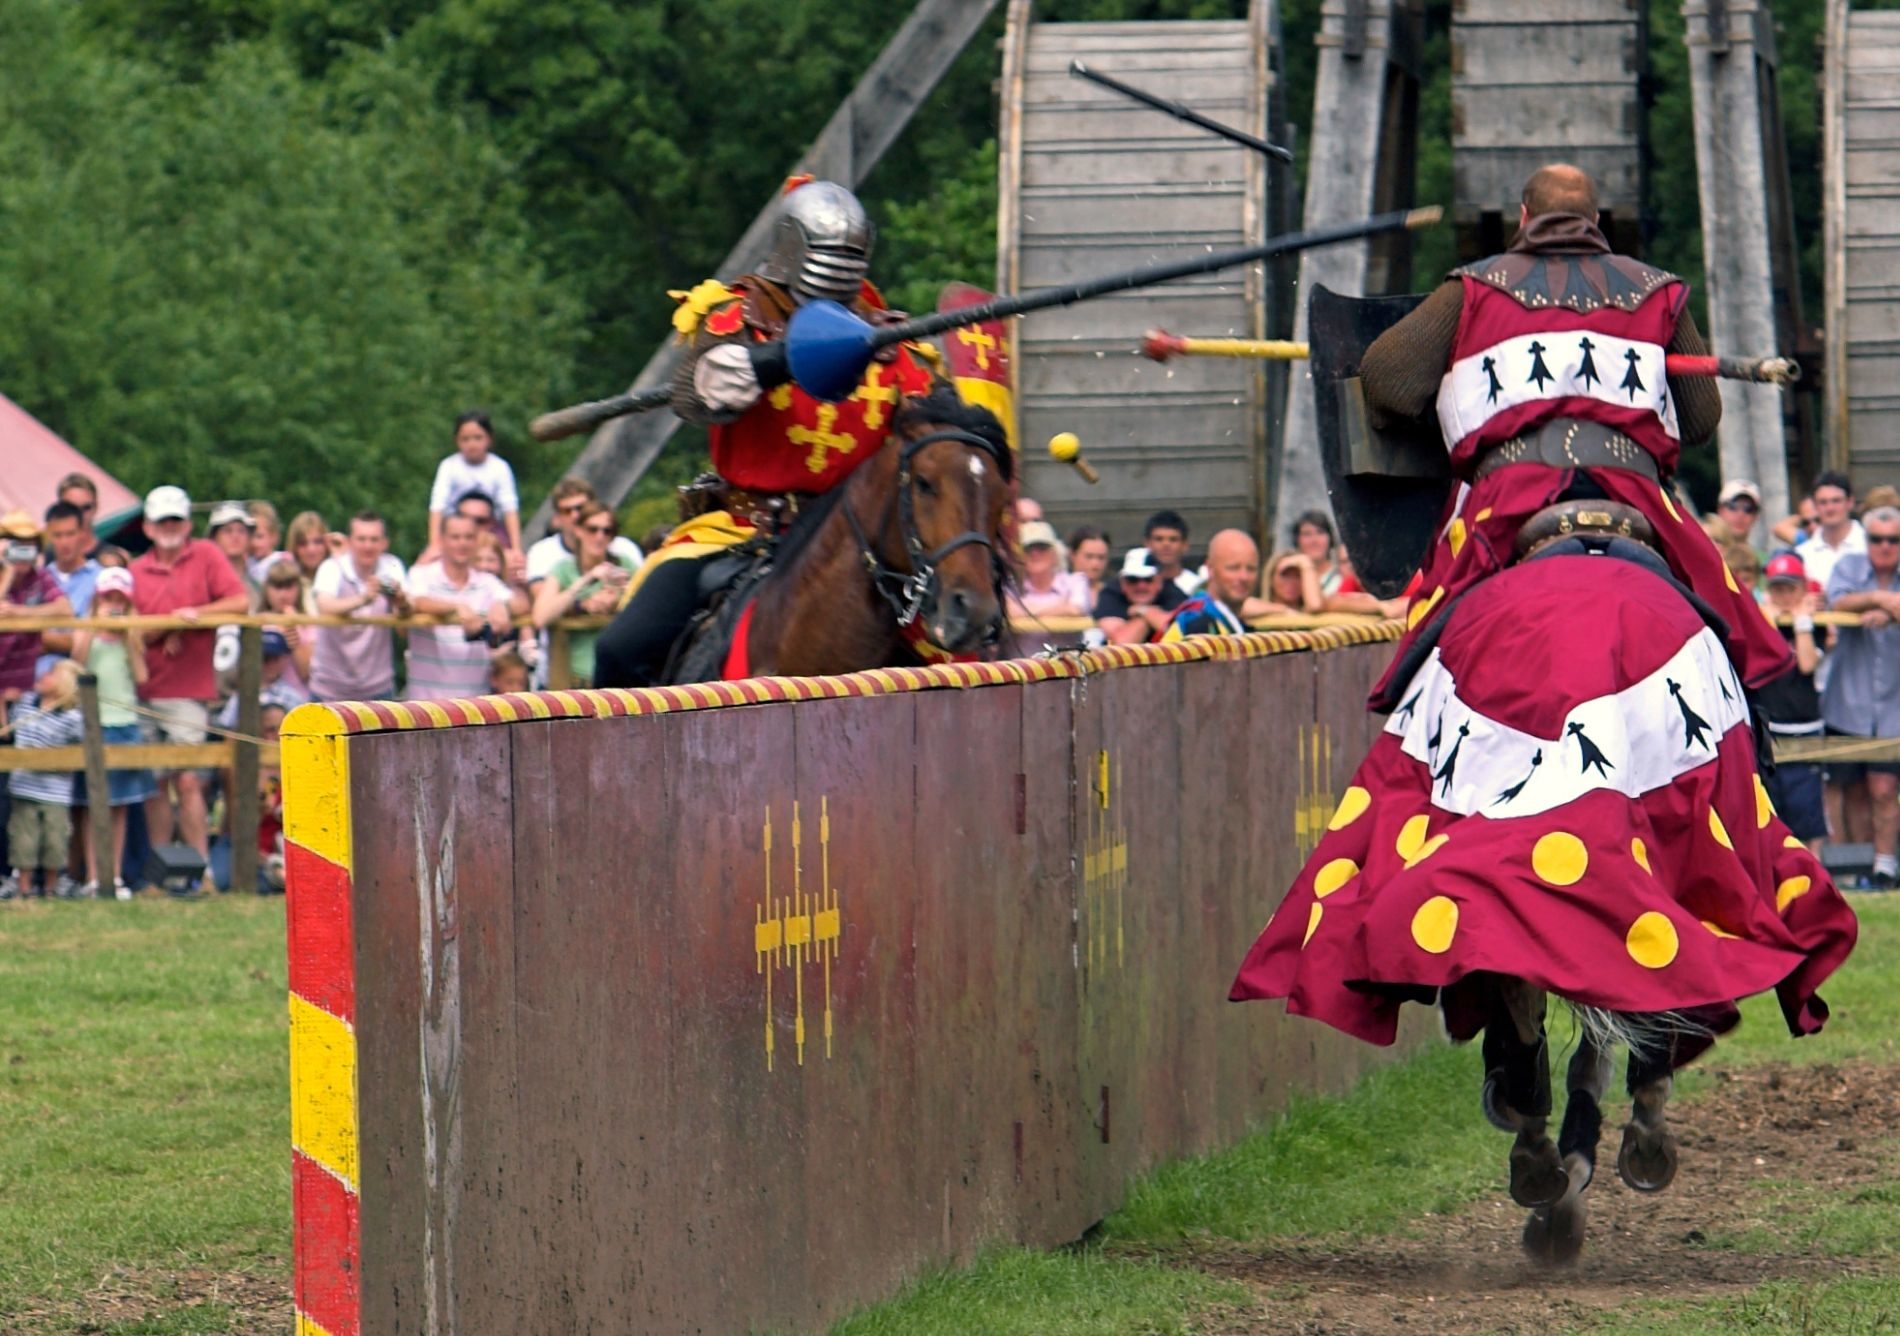 Two knights jousting at a medieval faire